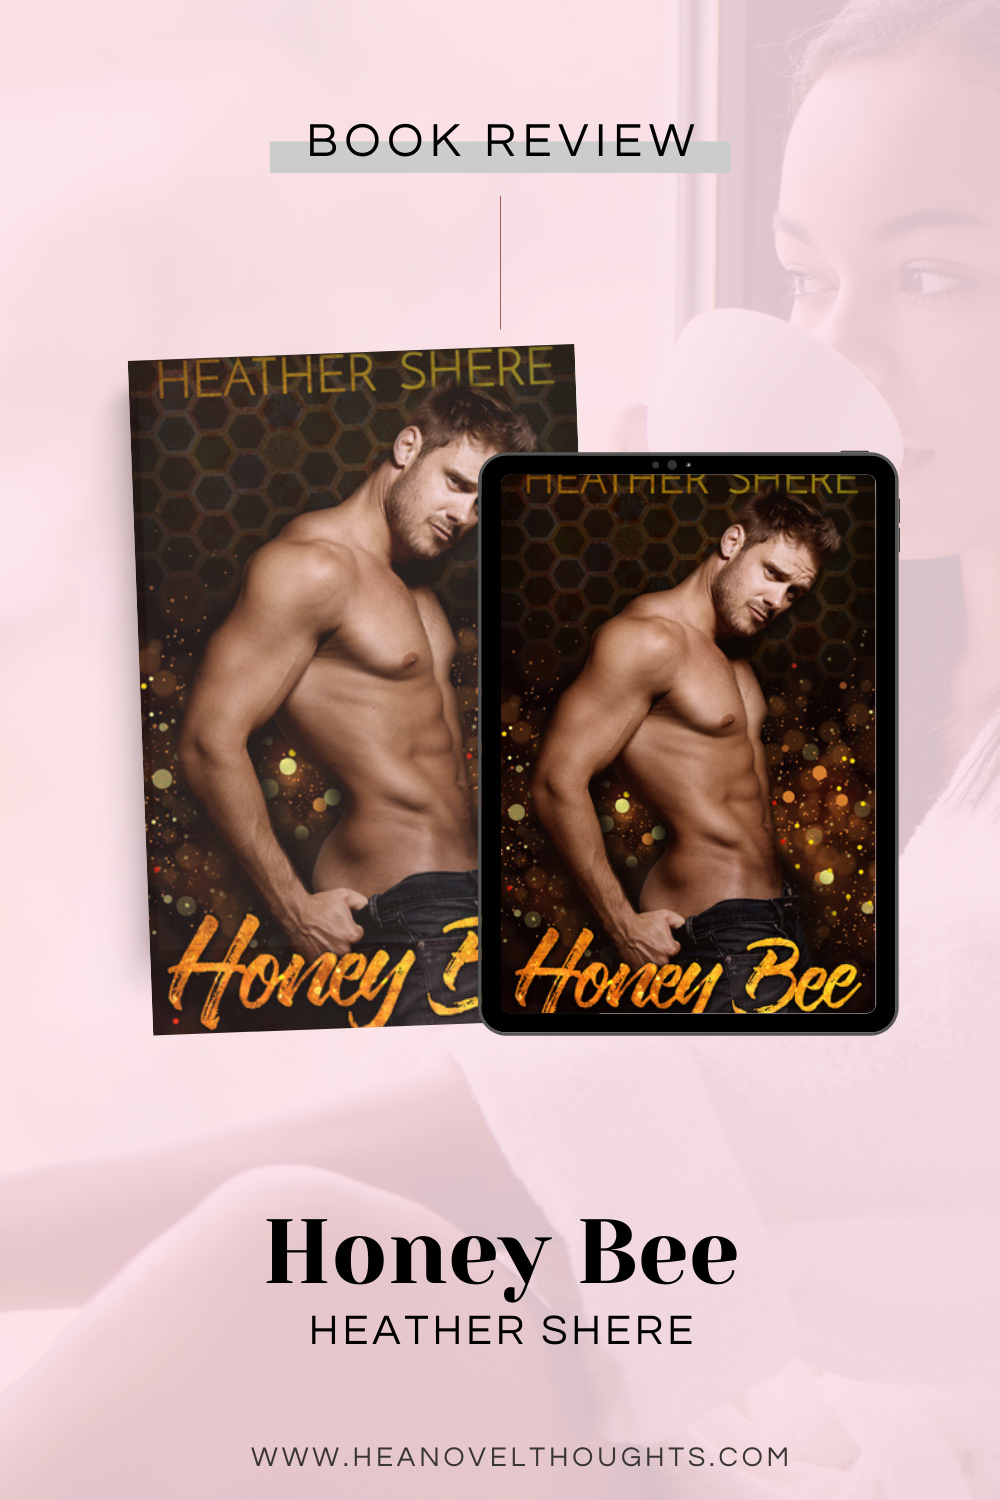 Honey Bee by Heather Shere